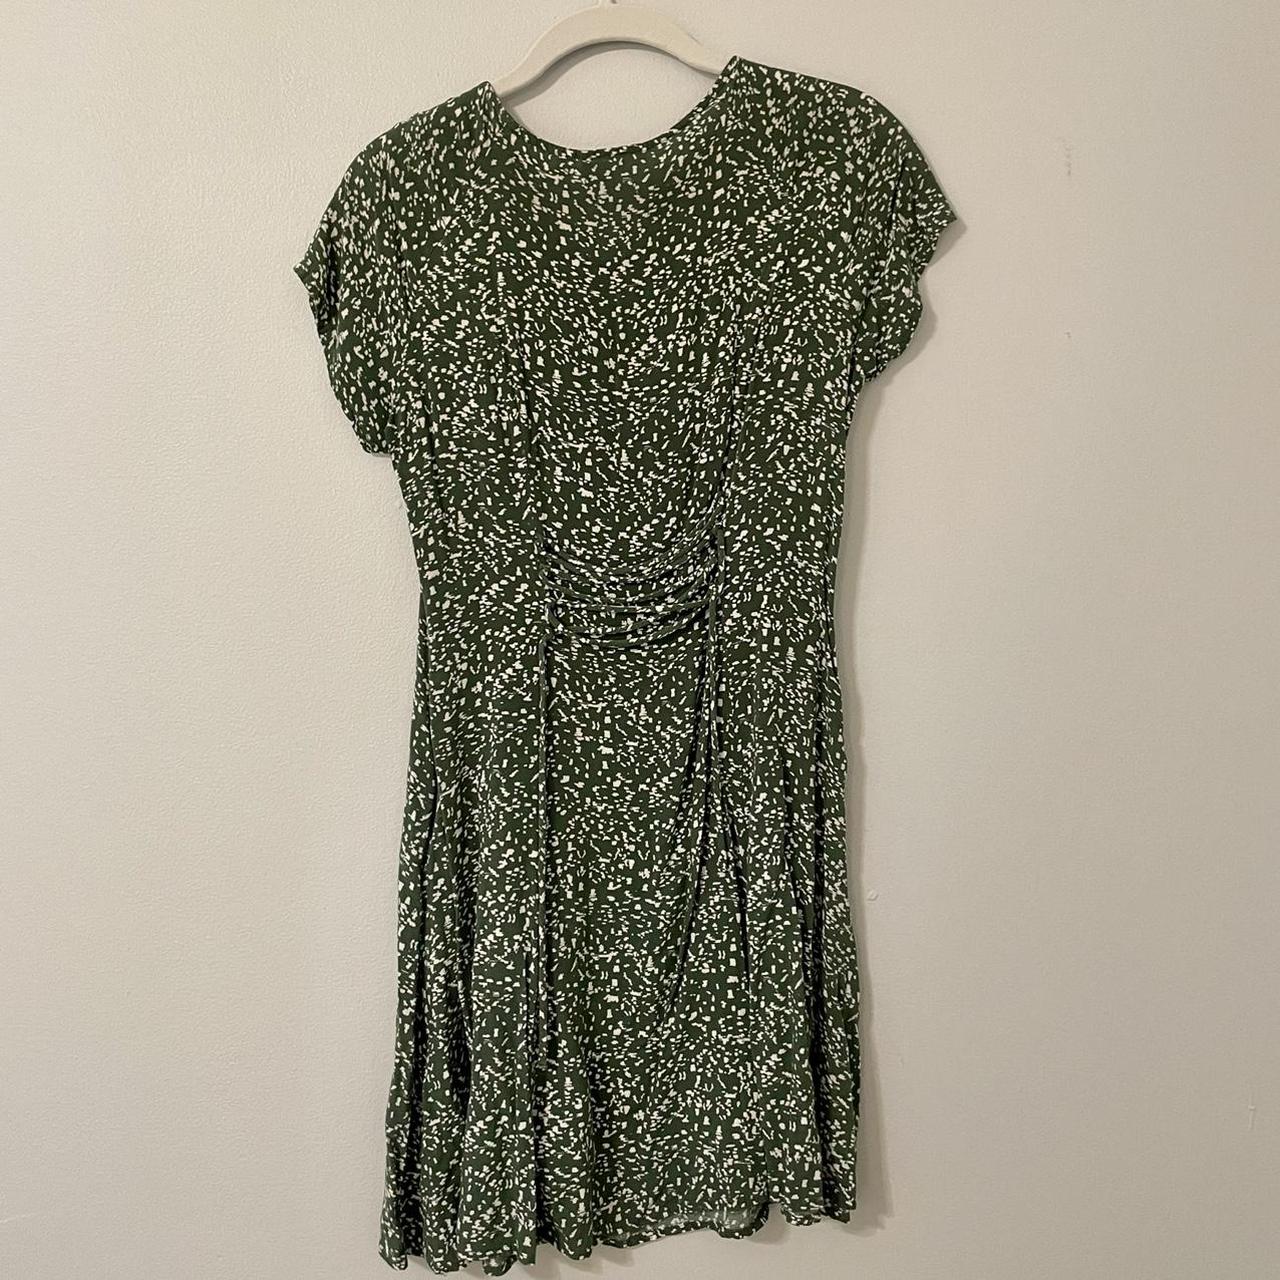 Product Image 2 - weekday rayon green and white